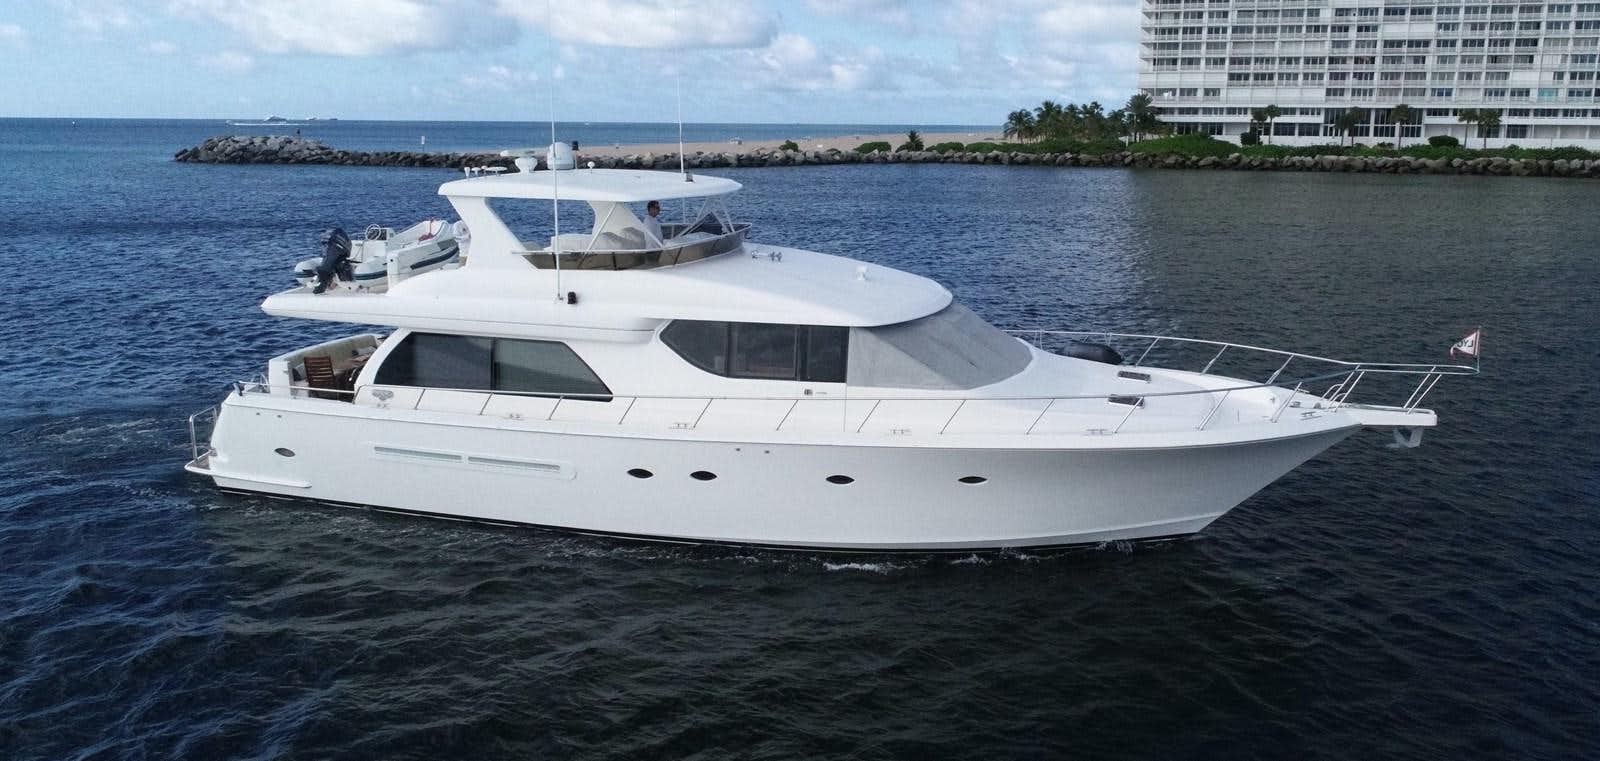 Room service
Yacht for Sale